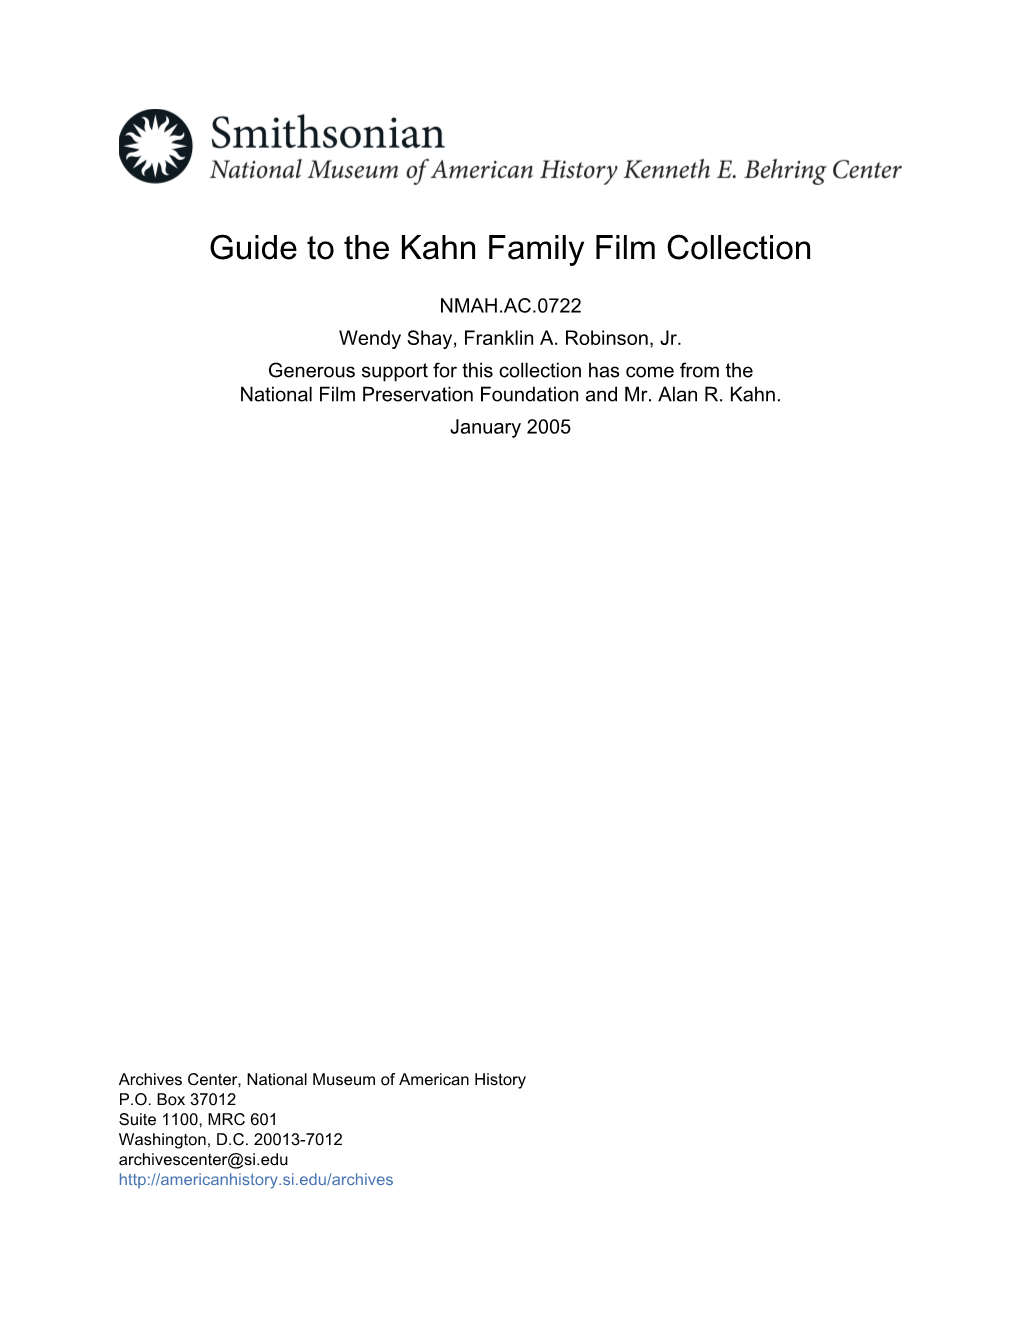 Guide to the Kahn Family Film Collection